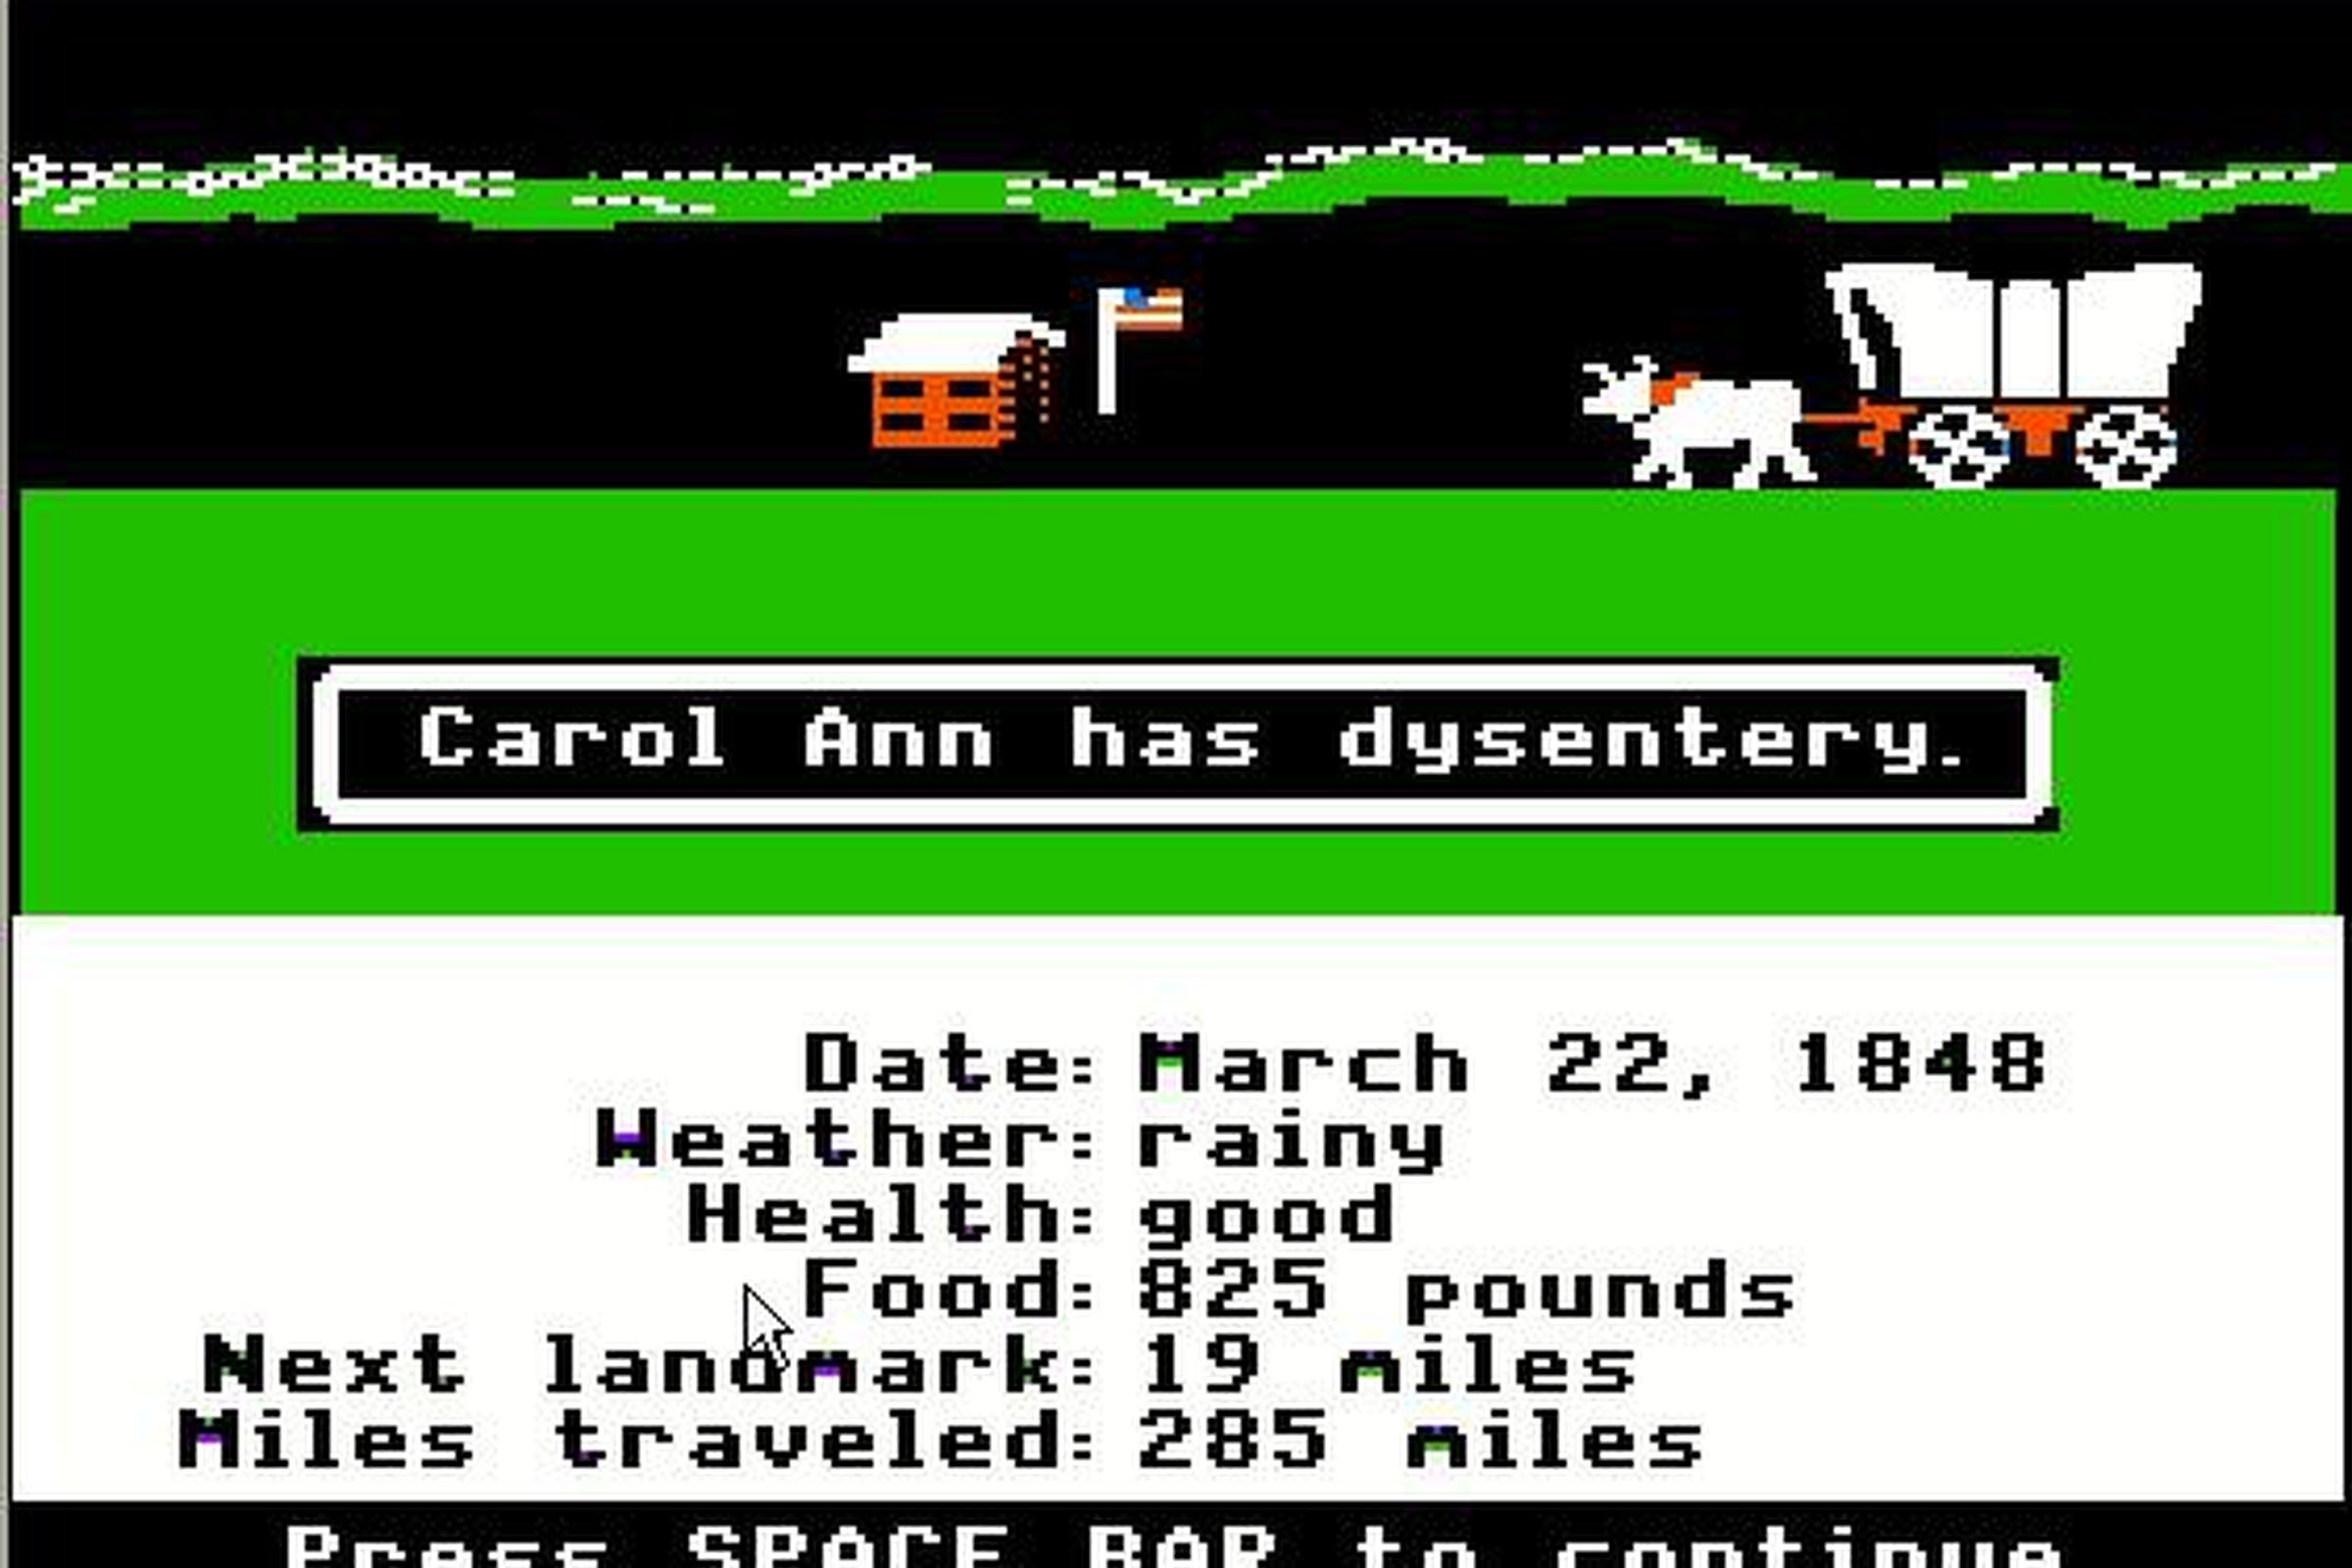 The Oregon Trail dysentery